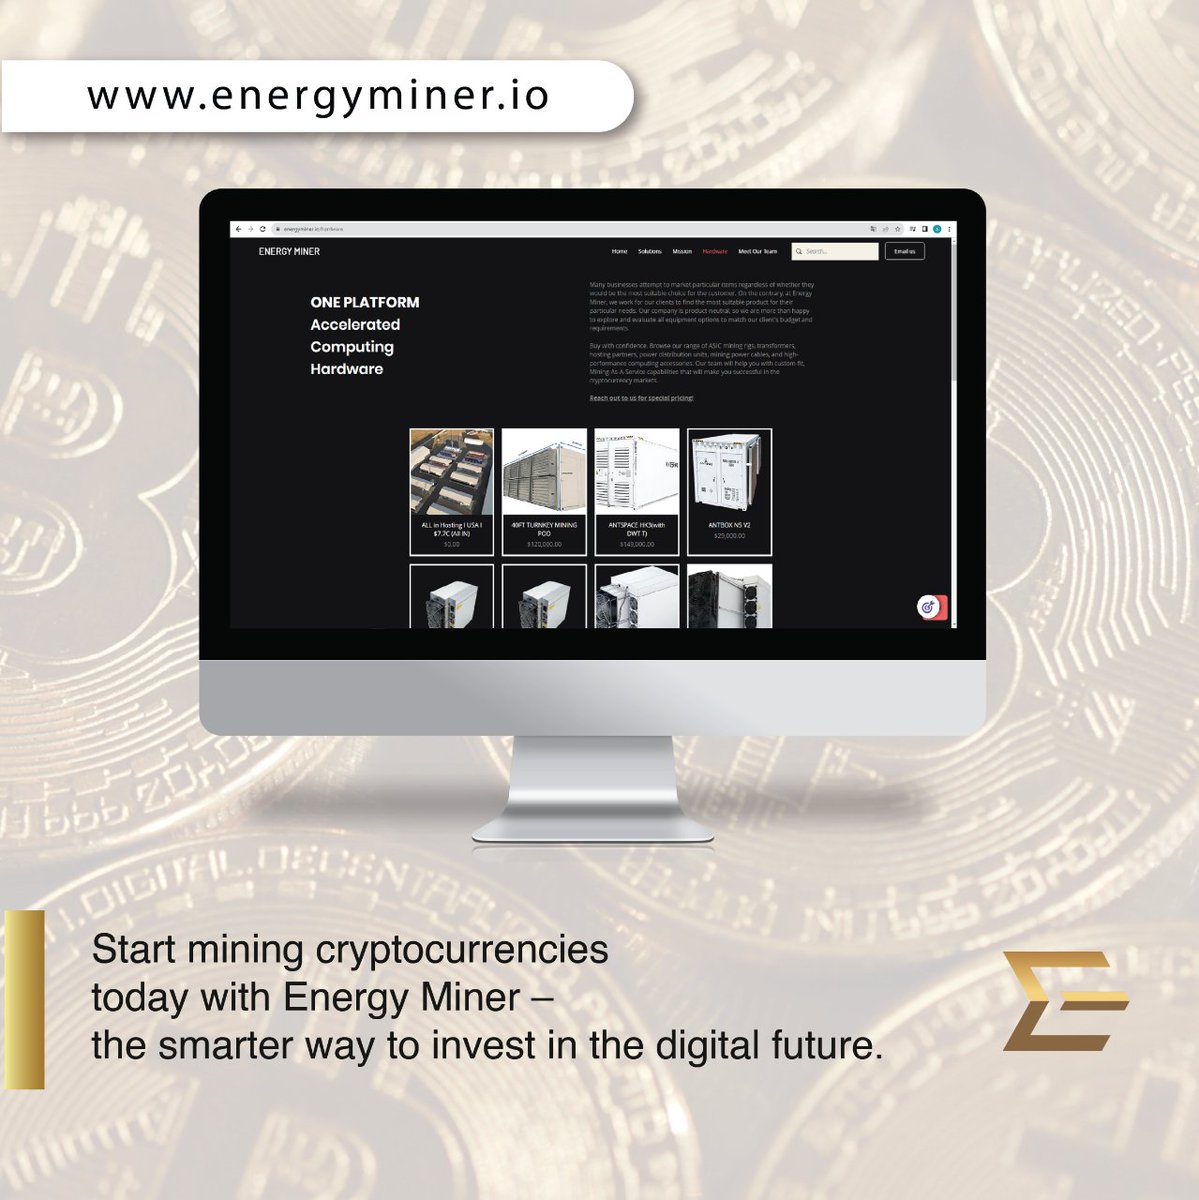 We will make your first experience with cryptocurrency mining as simple as possible! ⚒️

➡️Learn more about us at energyminer.io

#SustainableMining #CryptoMining #BusinessSolutions #EnergyMiner #BitcoinMining #SustainableEnergy